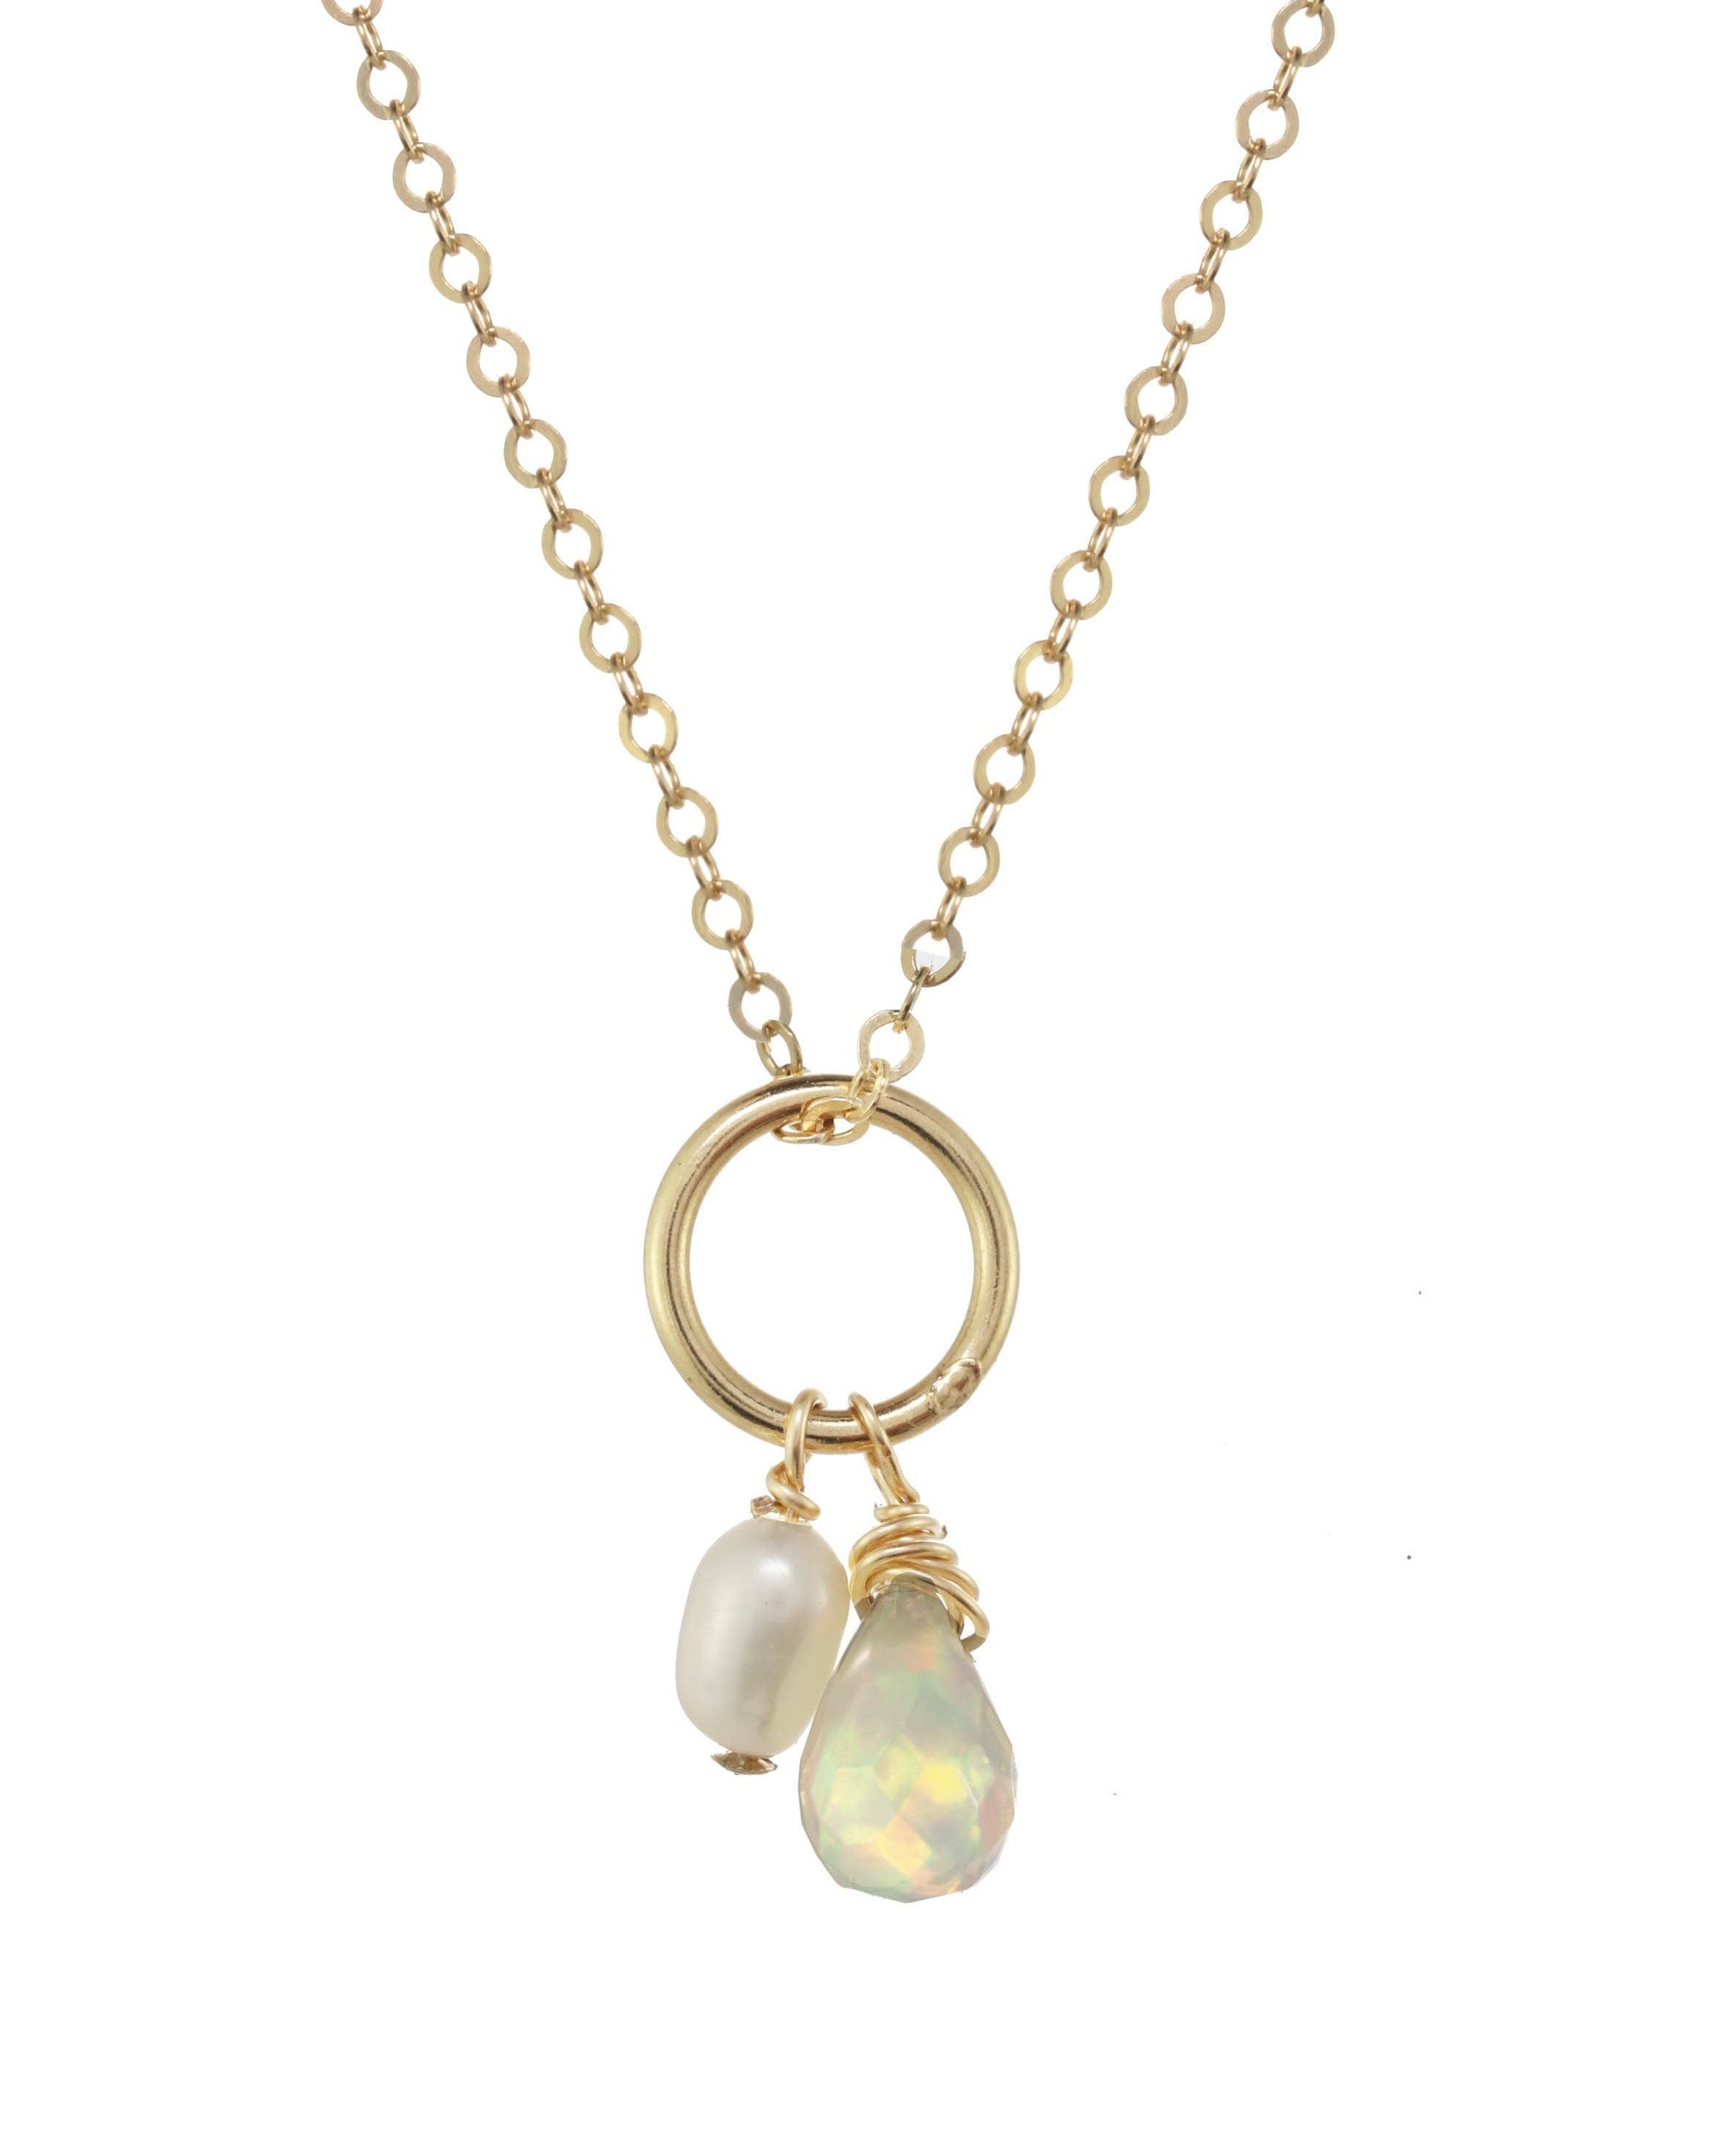 Mika Necklace by KOZAKH. A 16 to 18 inch adjustable length necklace, crafted in 14K Gold Filled, featuring a 3-4mm white rice Pearl and a 5-6mm faceted Ethiopian Opal droplet.